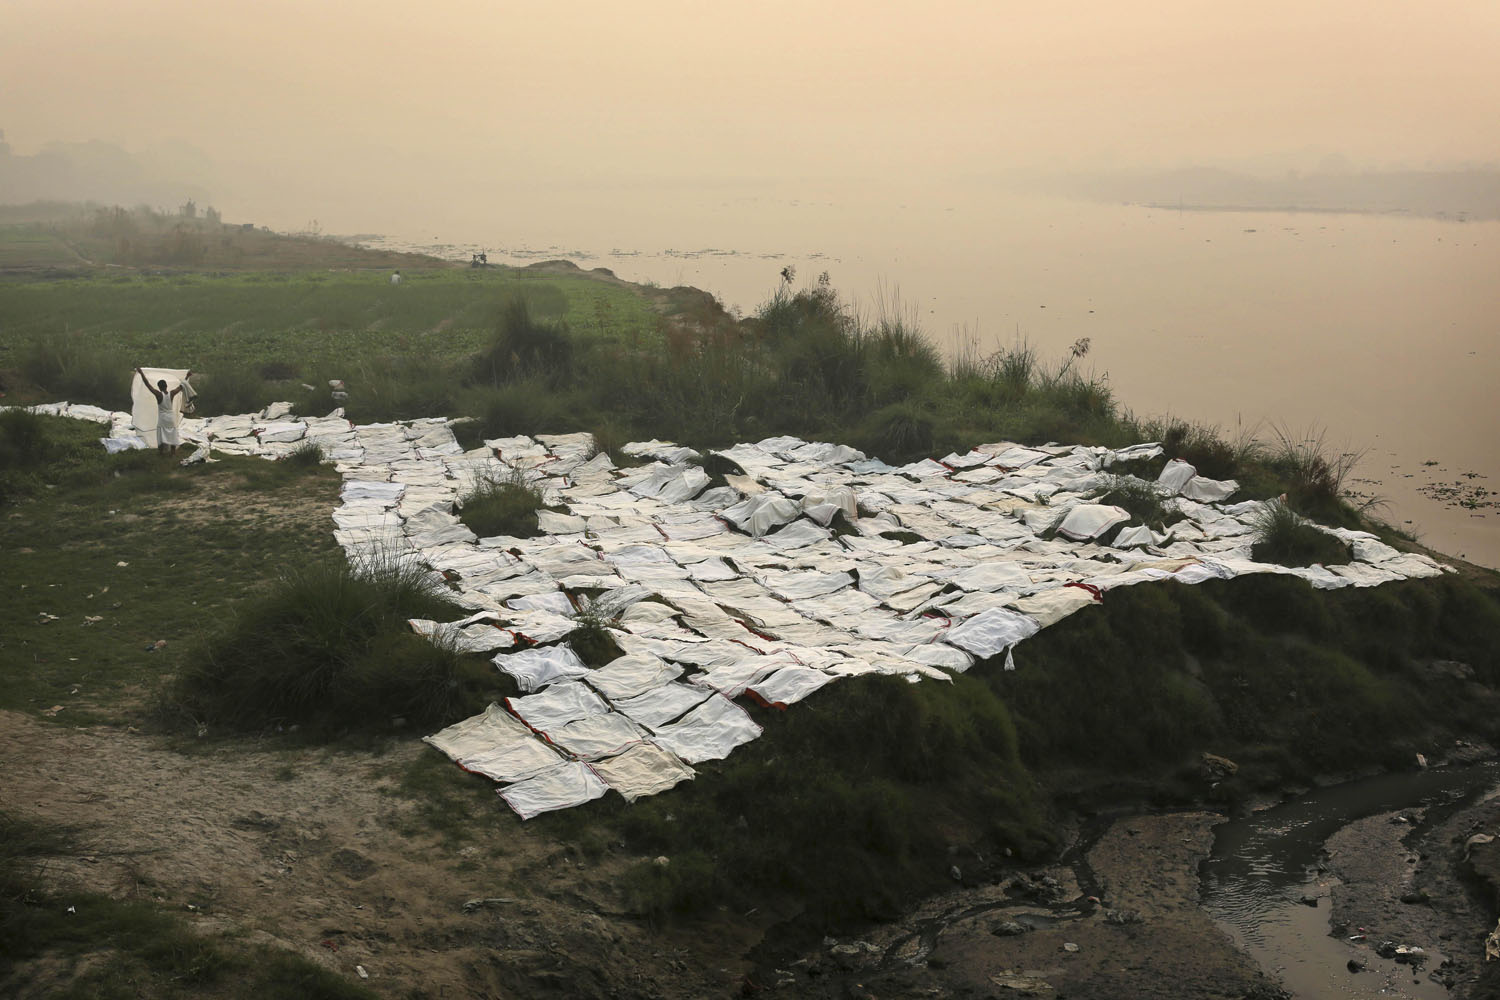 Image: Nov. 6, 2012. An Indian man dries laundry on the polluted Yamuna River on a hazy morning in New Delhi.